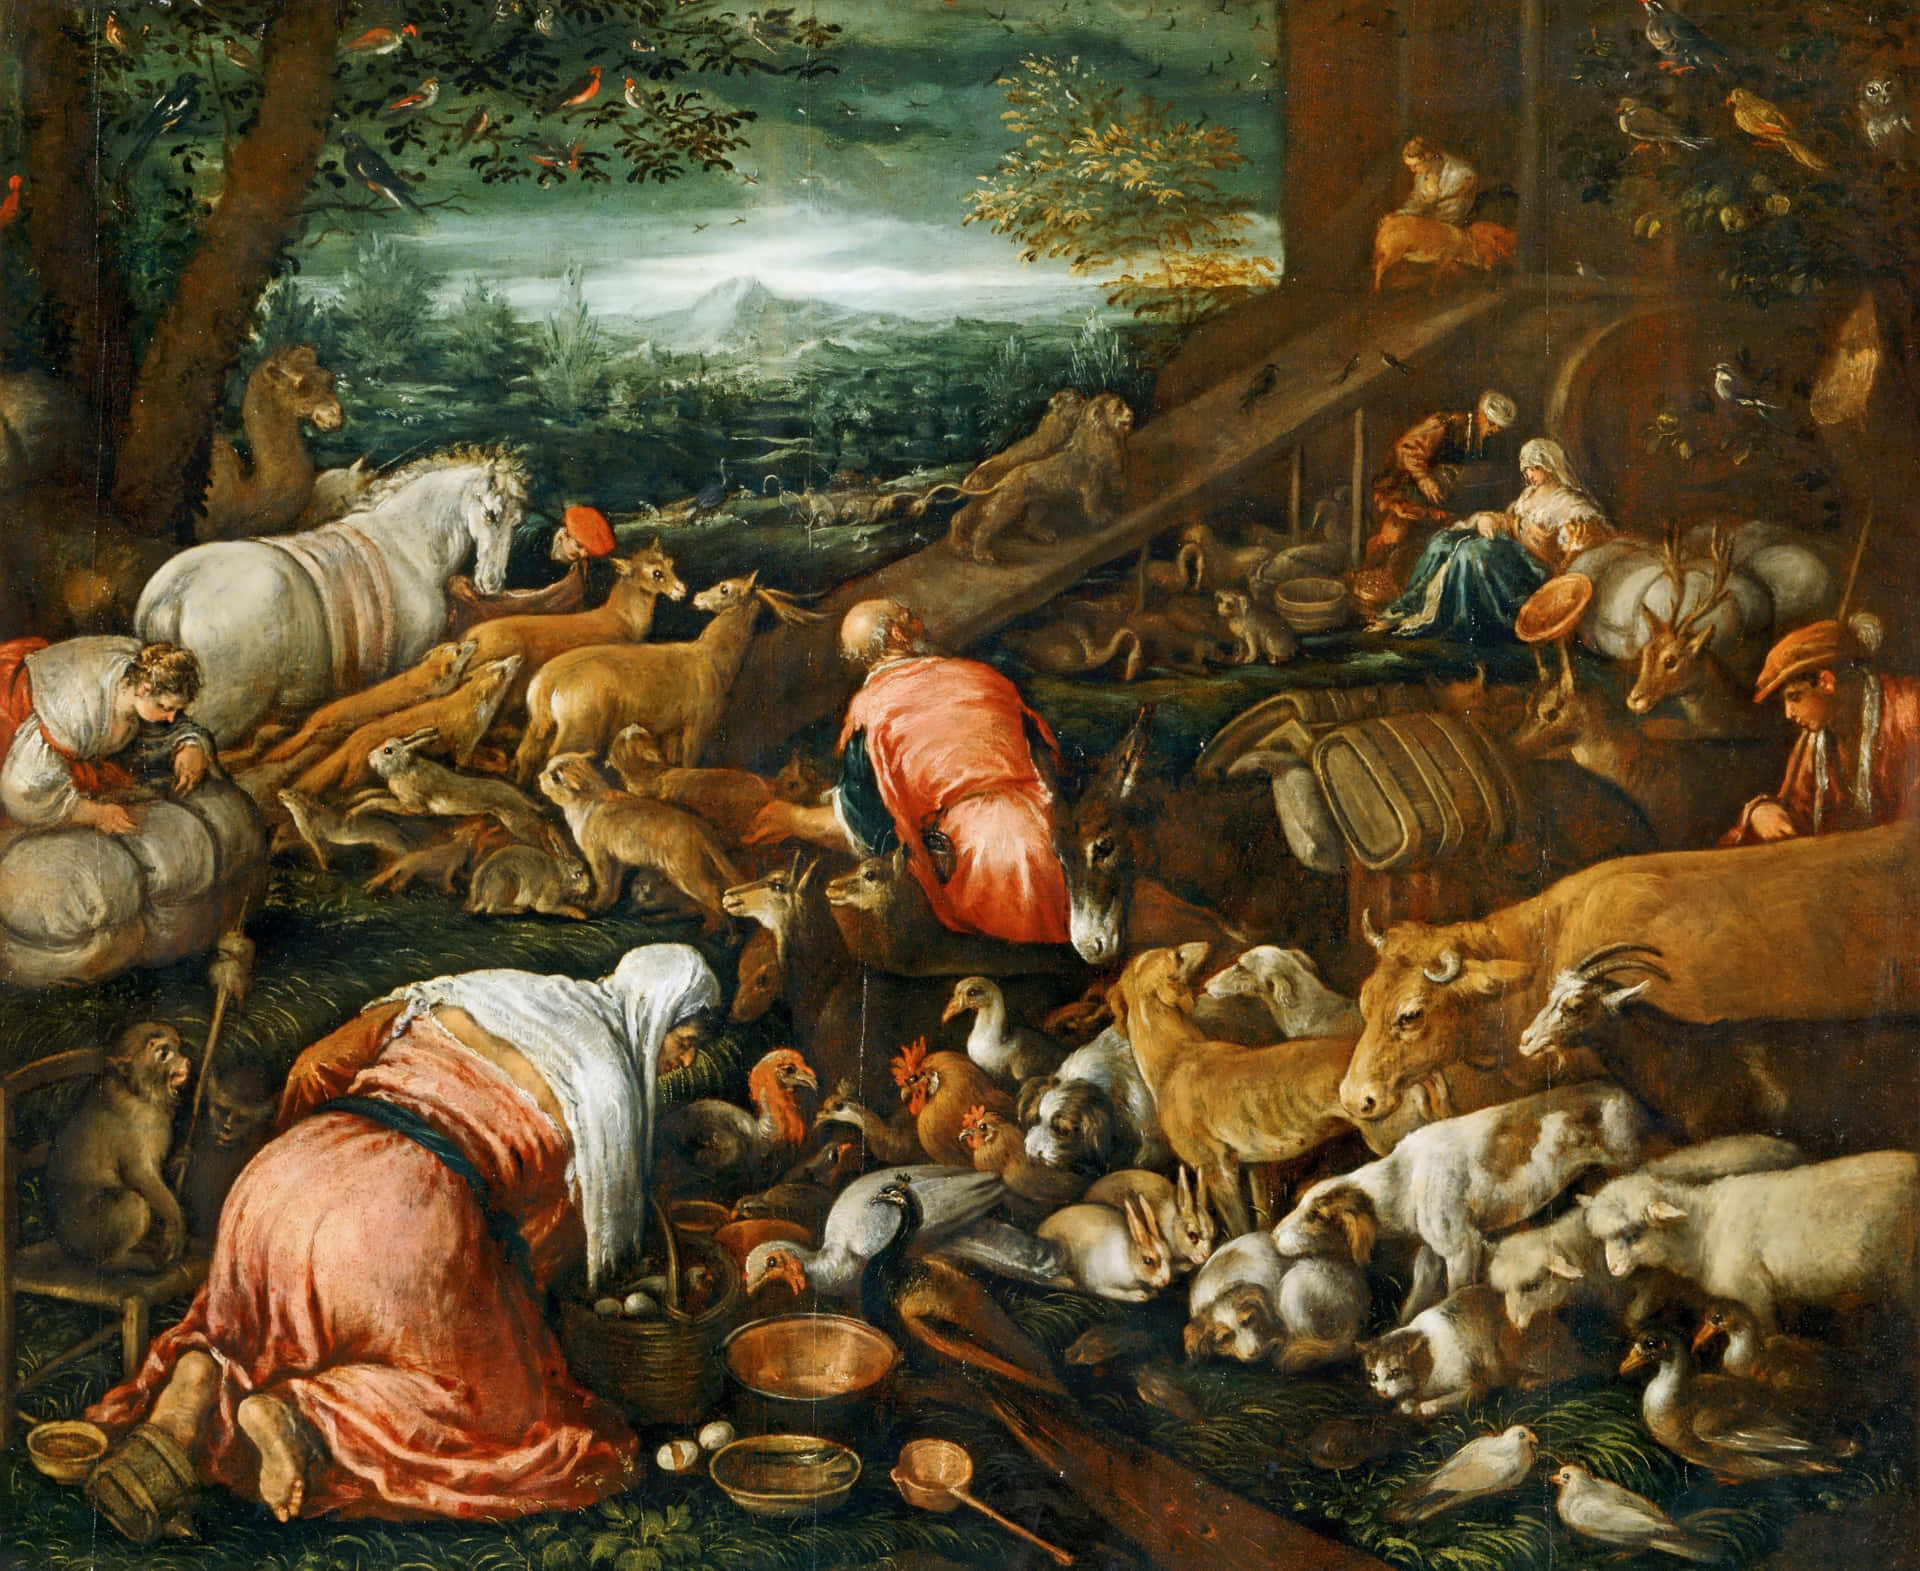 Noah, His Family, and all of the Animals Surviving the Severe Floods Aboard the Ark